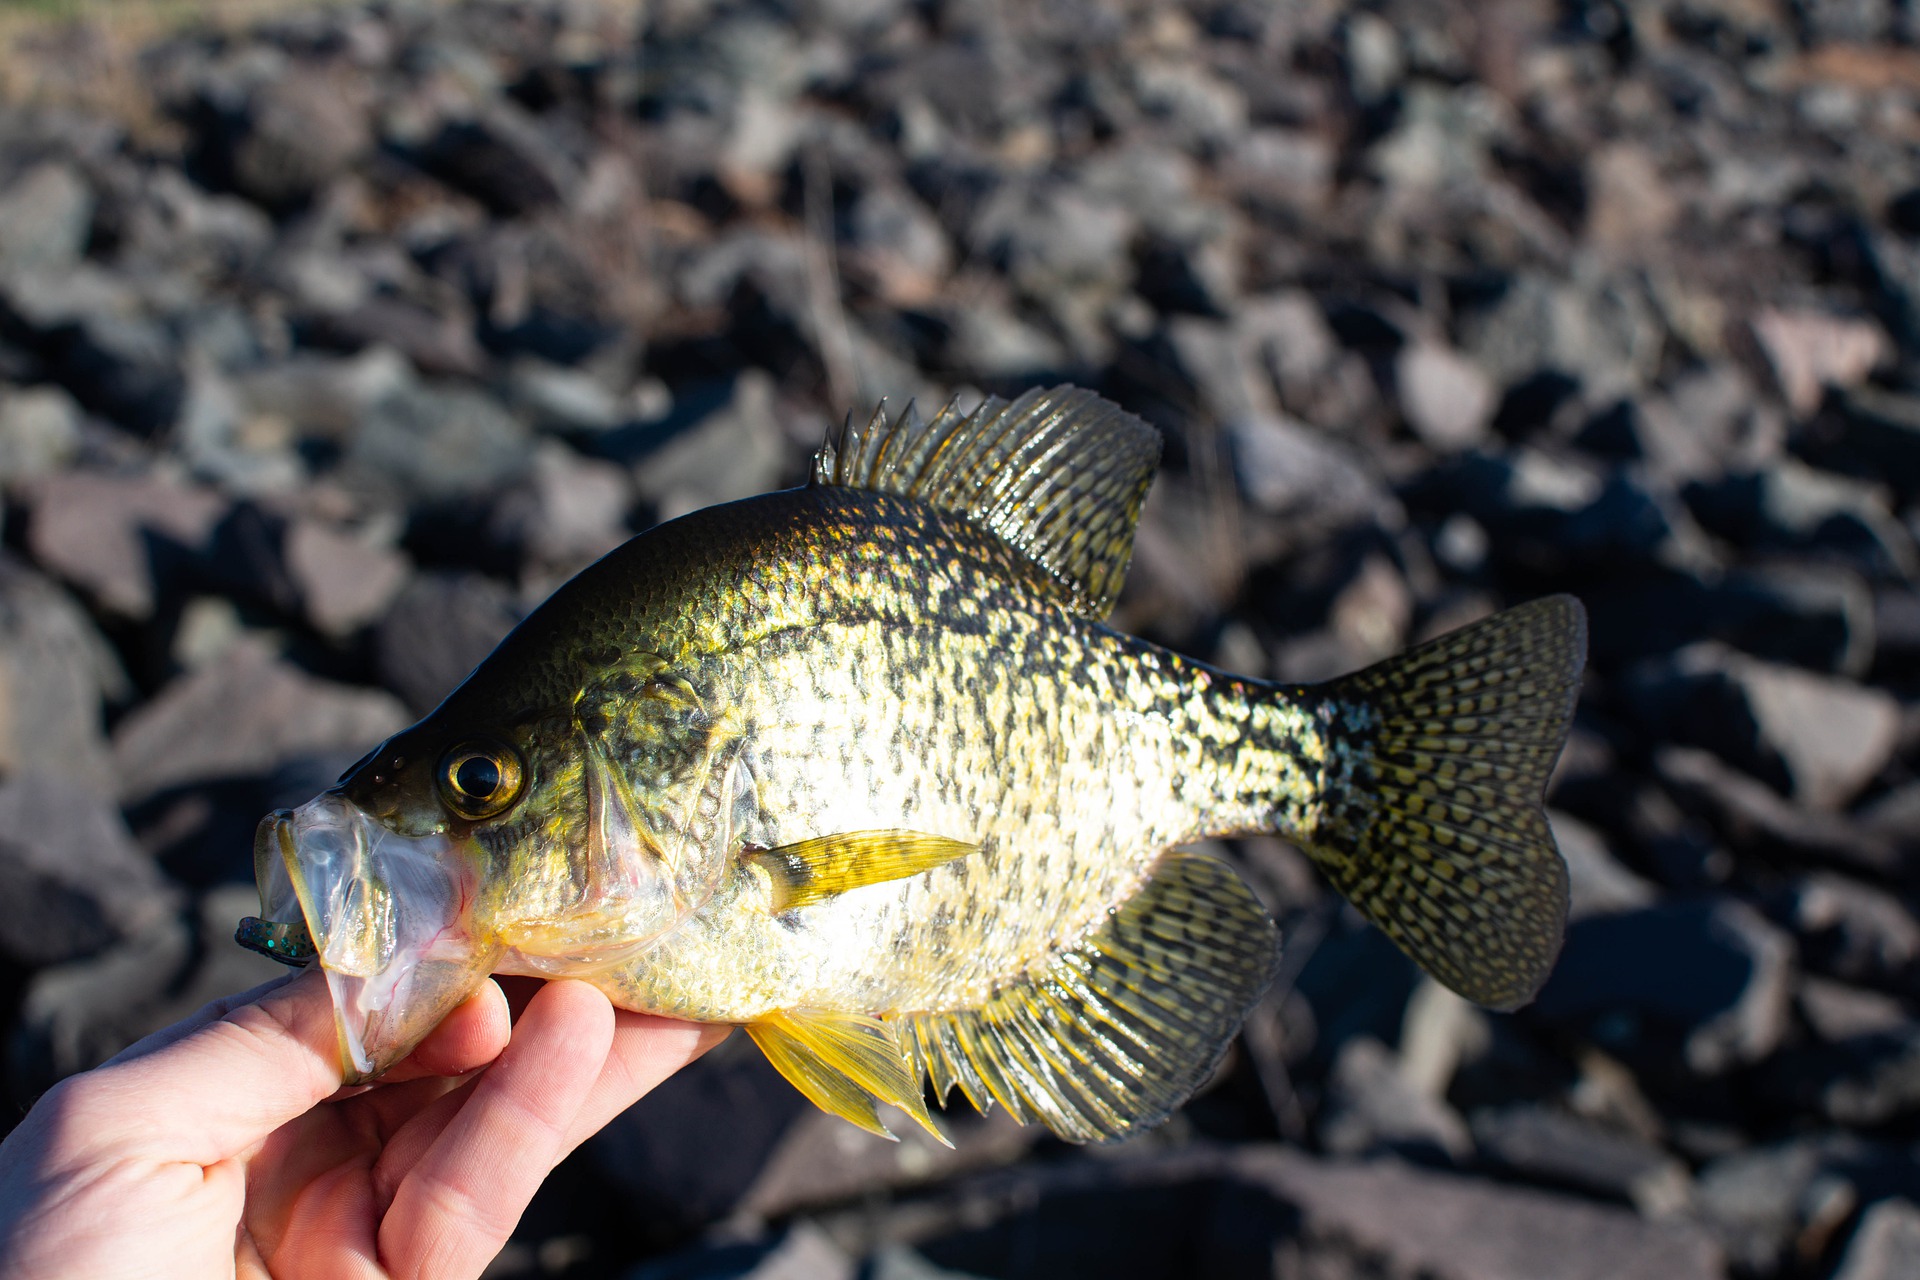 12 crappie fishing 'hot spots' according to Texas Parks and